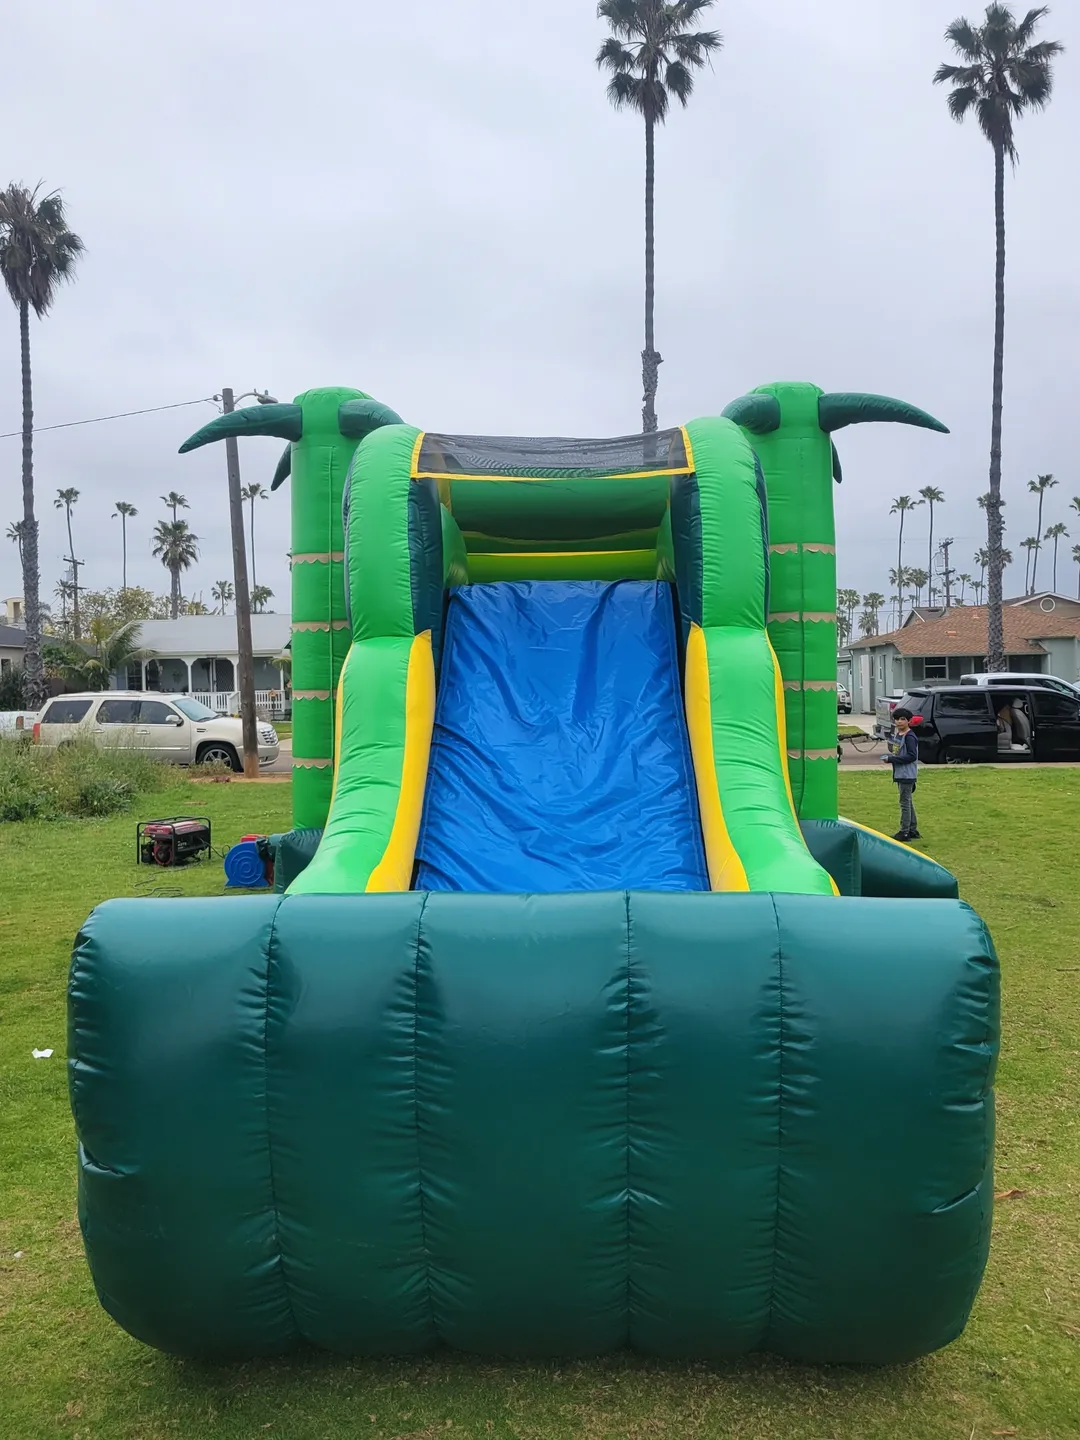 A green and blue inflatable slide in the grass.